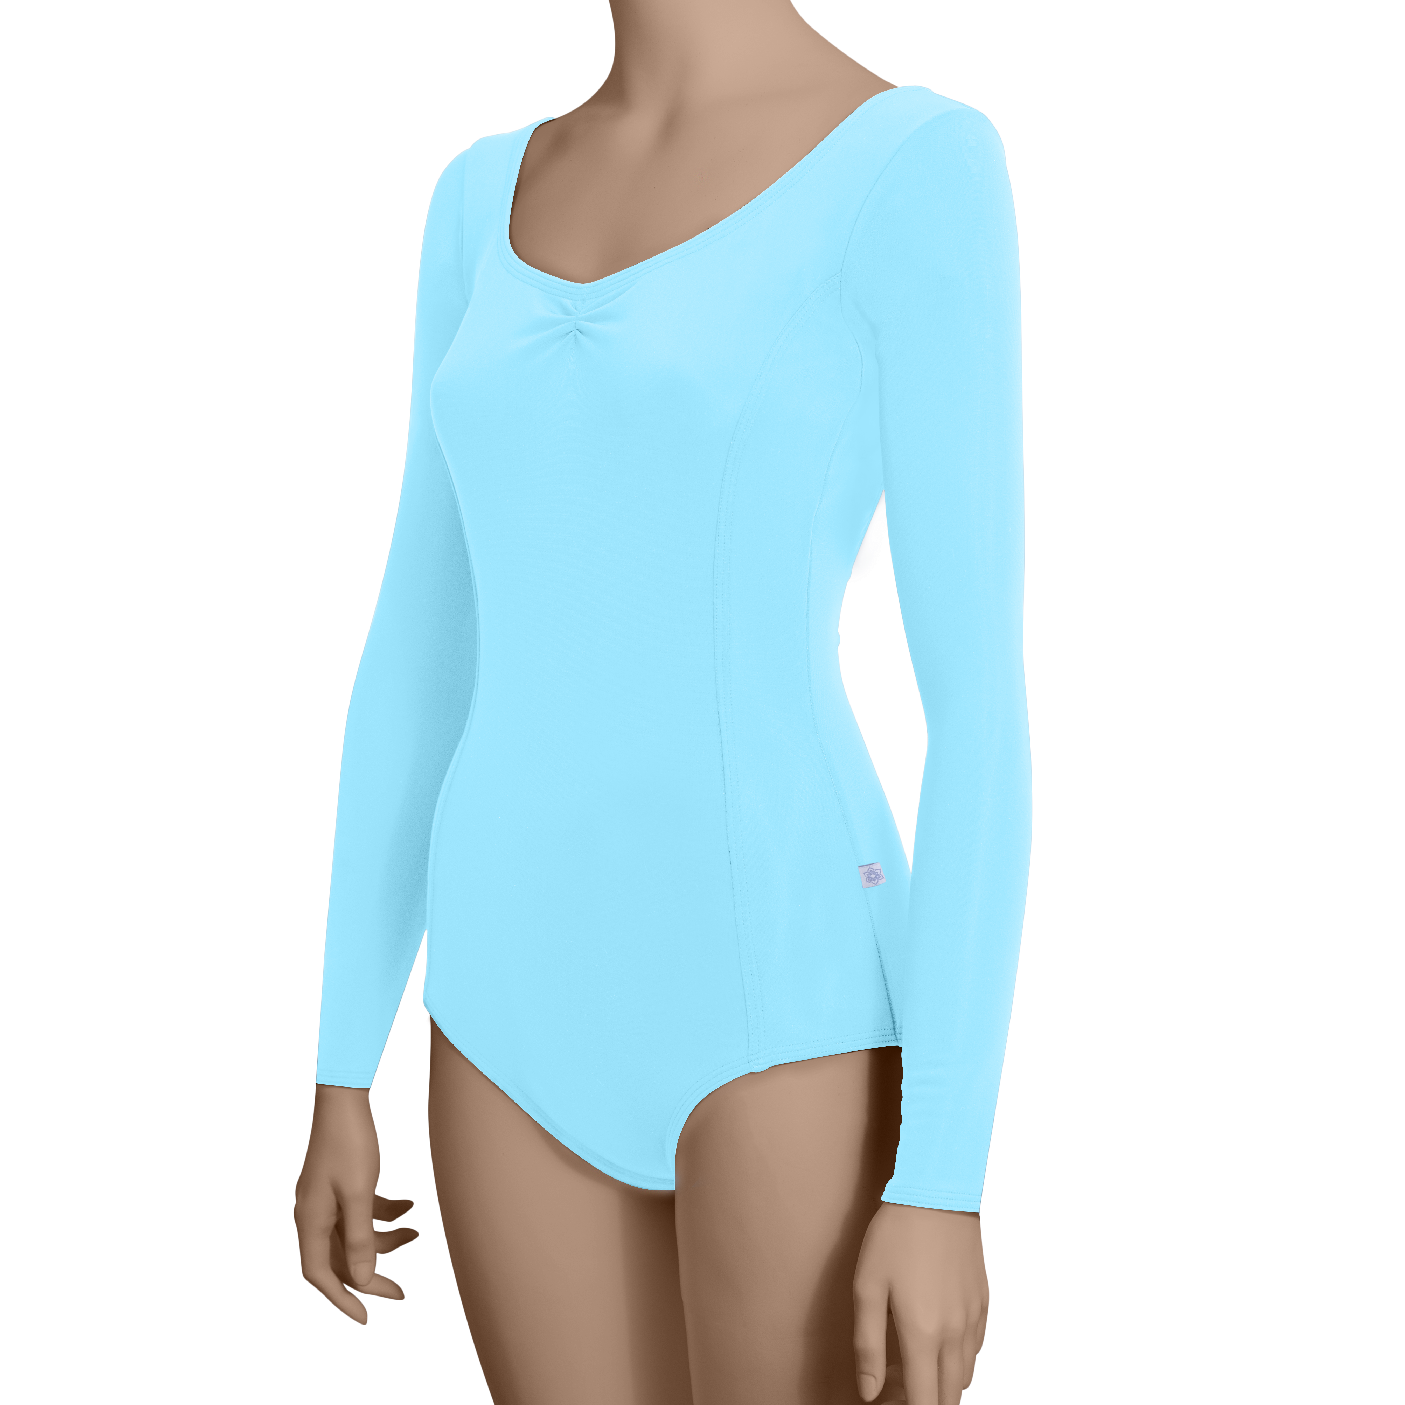 Princess Seams Long Sleeves with Pinched Front, Low Back - Adult